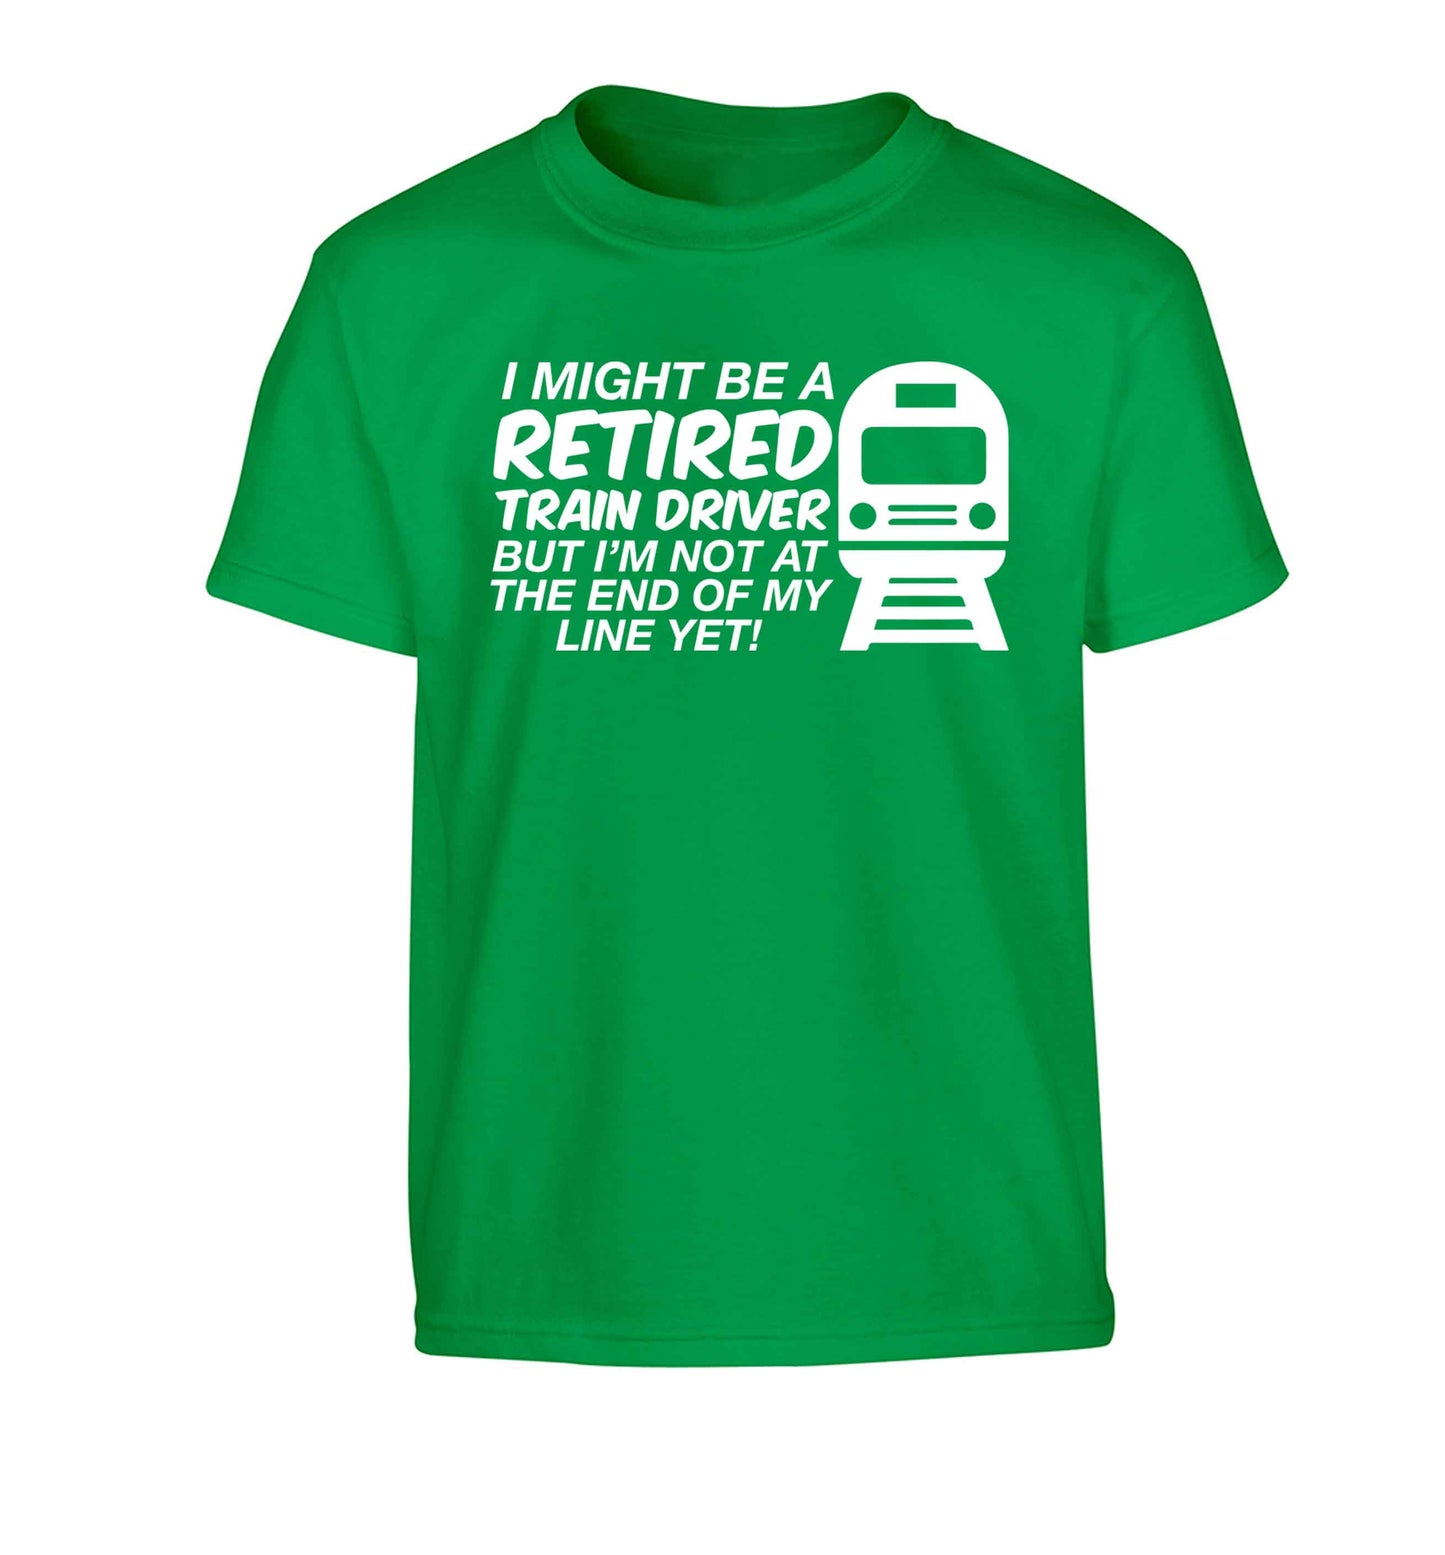 Retired train driver but I'm not at the end of my line yet Children's green Tshirt 12-13 Years